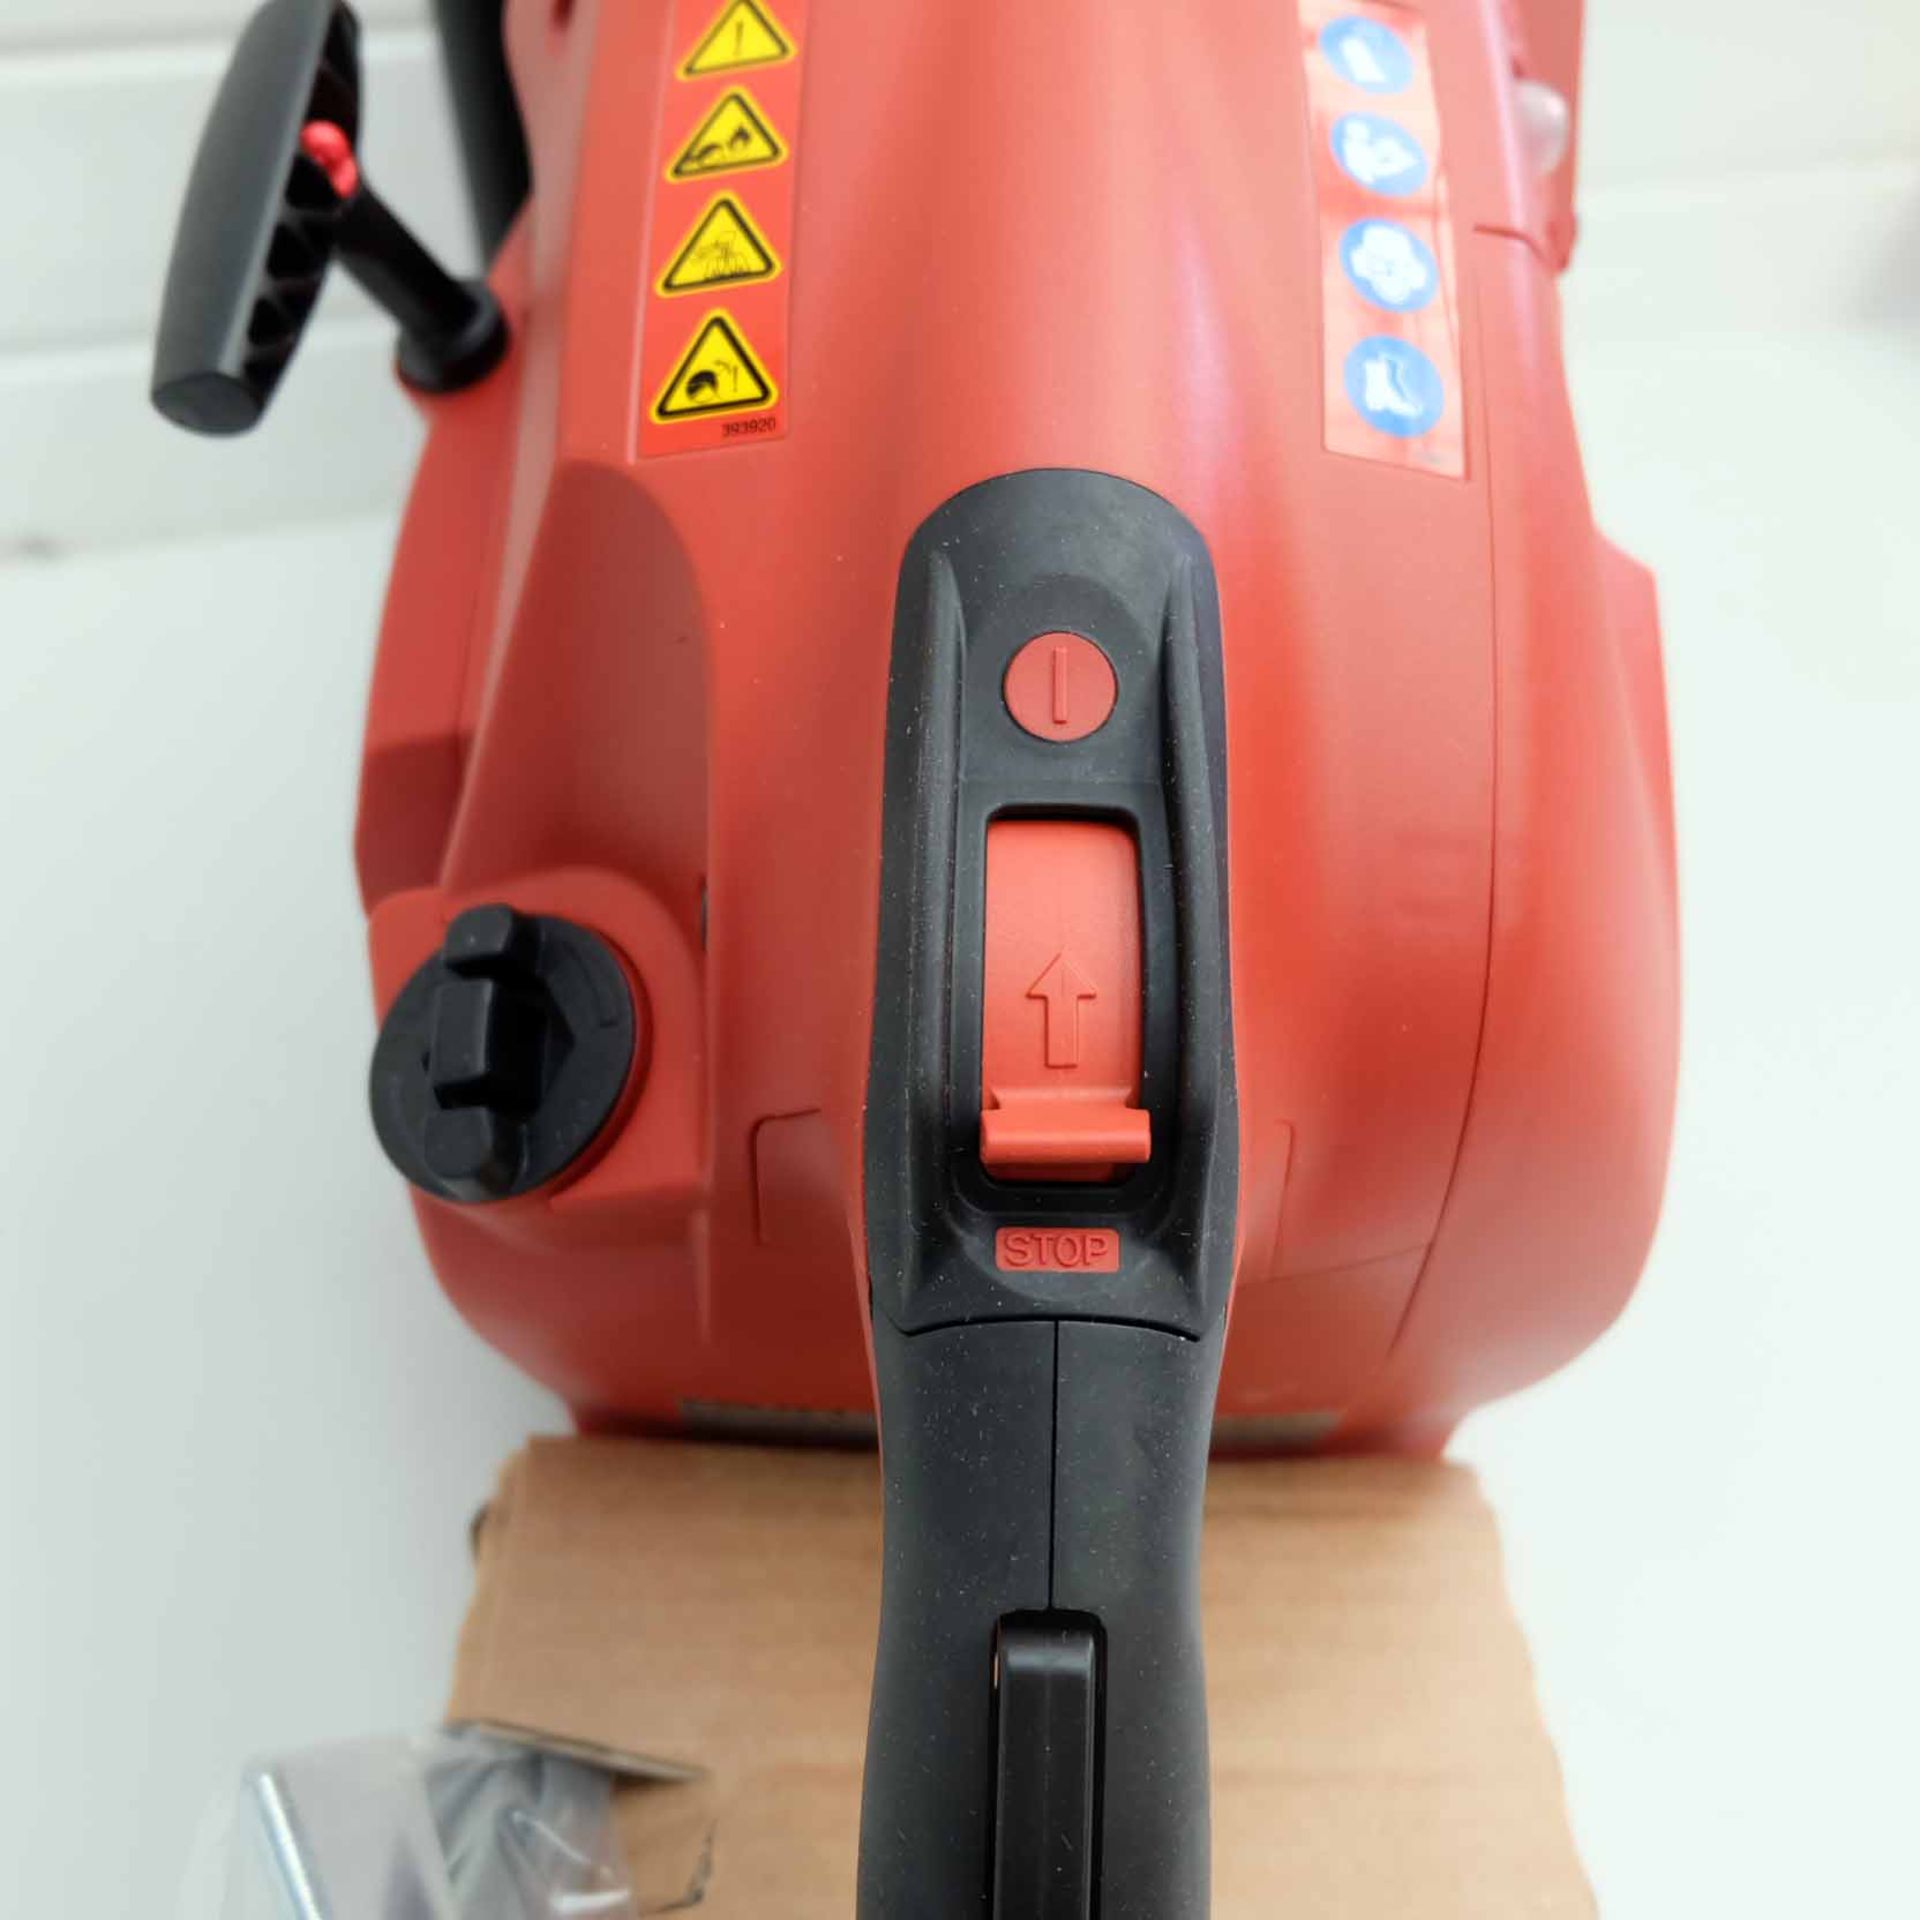 Hilti Hand Held Gas Saw. Model DSH 900-X 16". Complete With SP-16"x1" Blade. Easy Start Auto-Choke S - Image 13 of 22